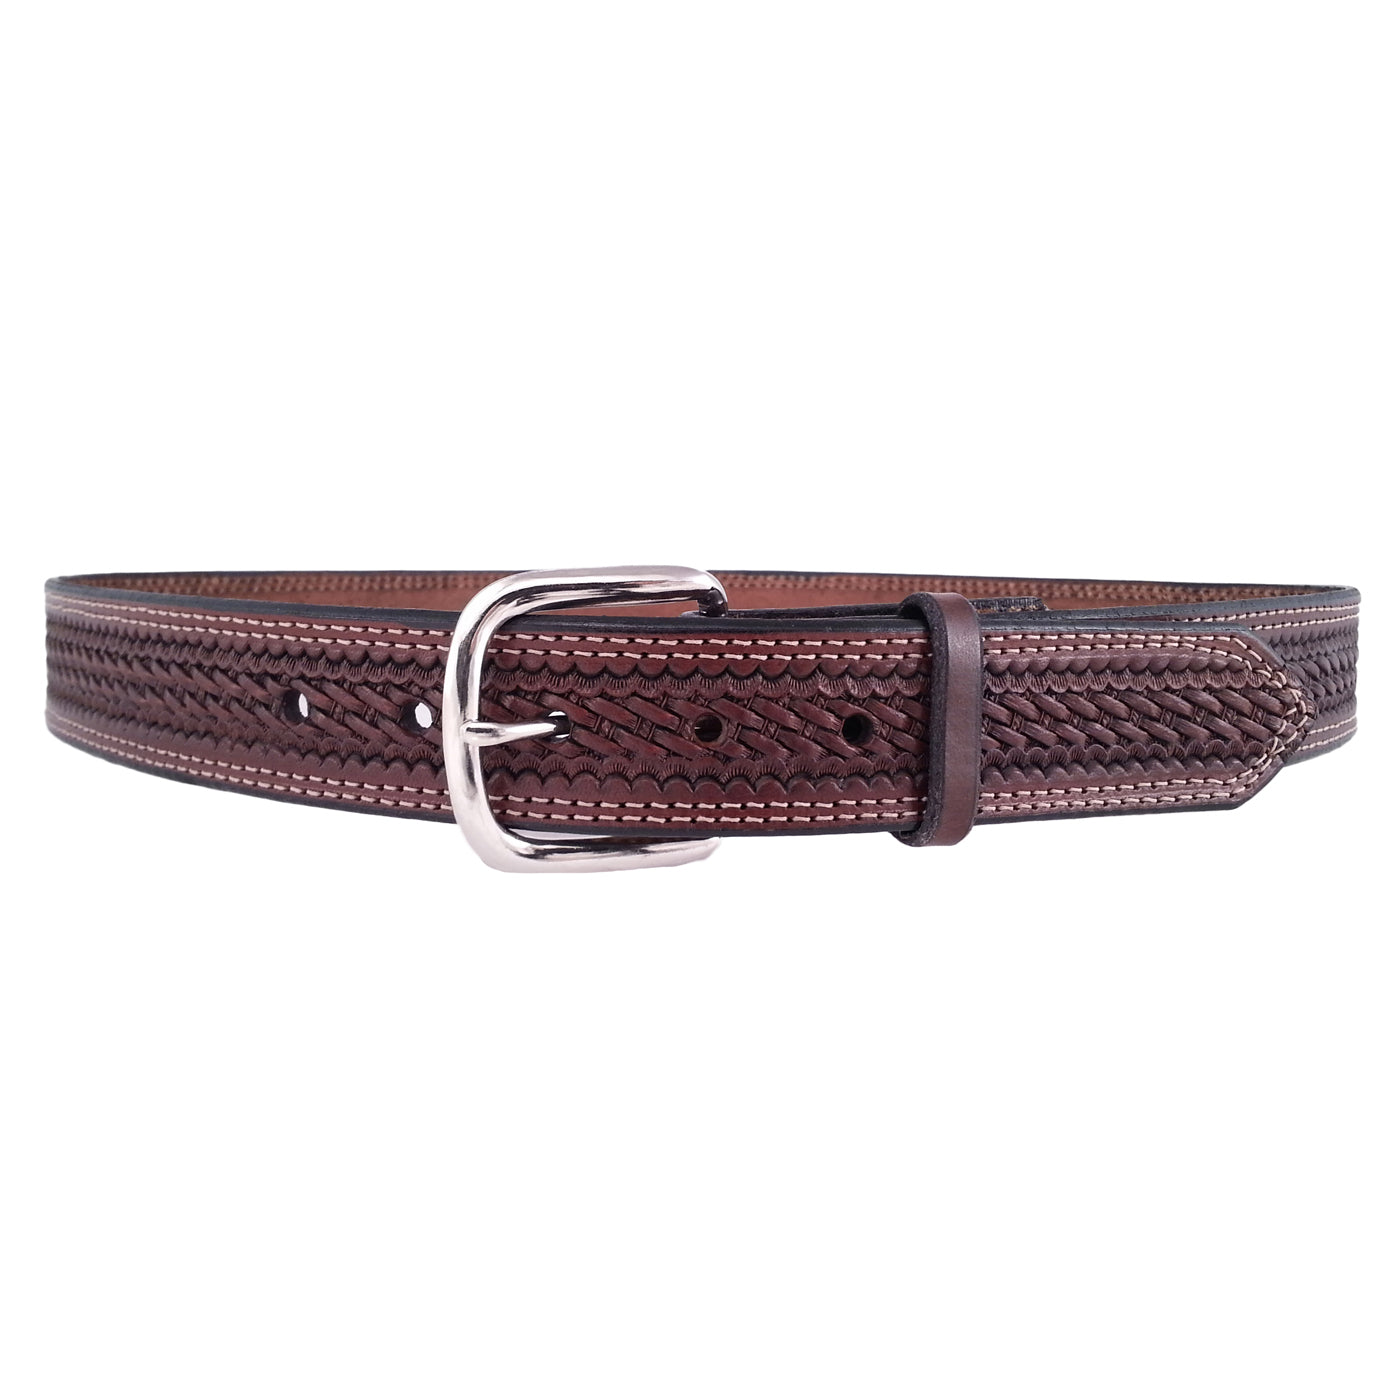 Embossed Country Utility Belt with Cool Oval Belt Buckle Chicken / 36-38 (Fit Waist 34-36 in)